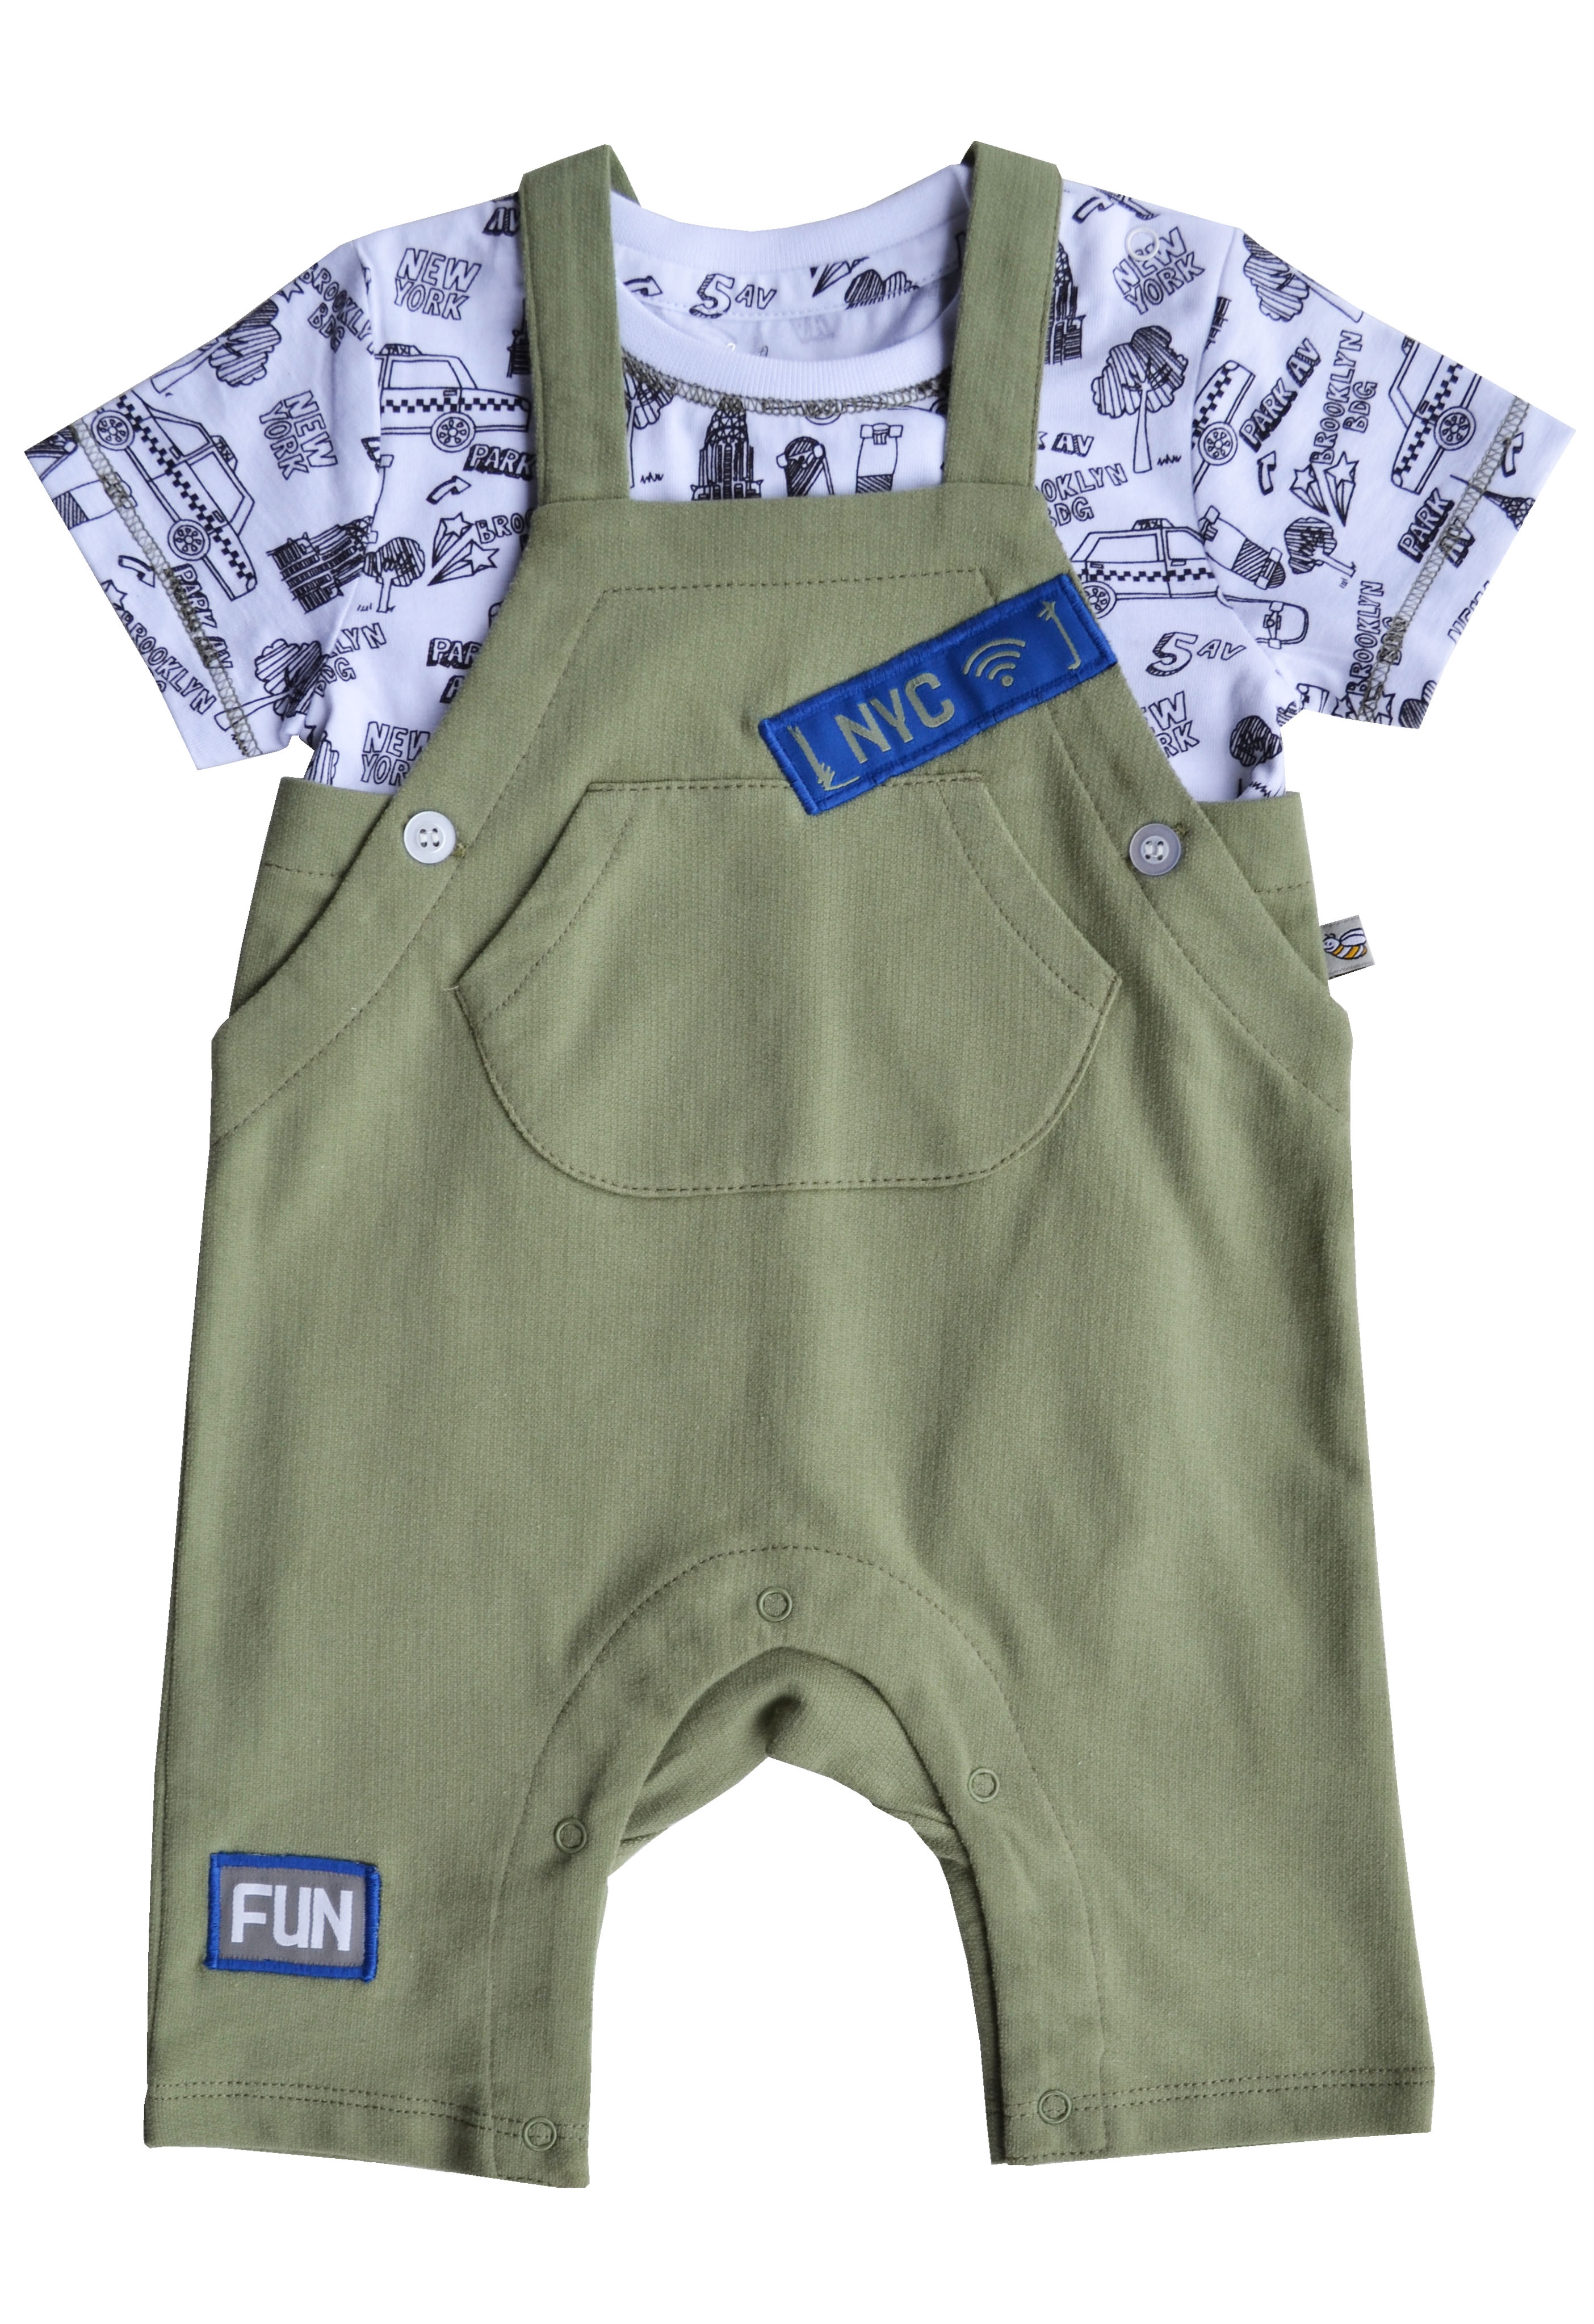 Babeez | New York Print T-Shirt With Green Romper Set (100% Cotton) undefined